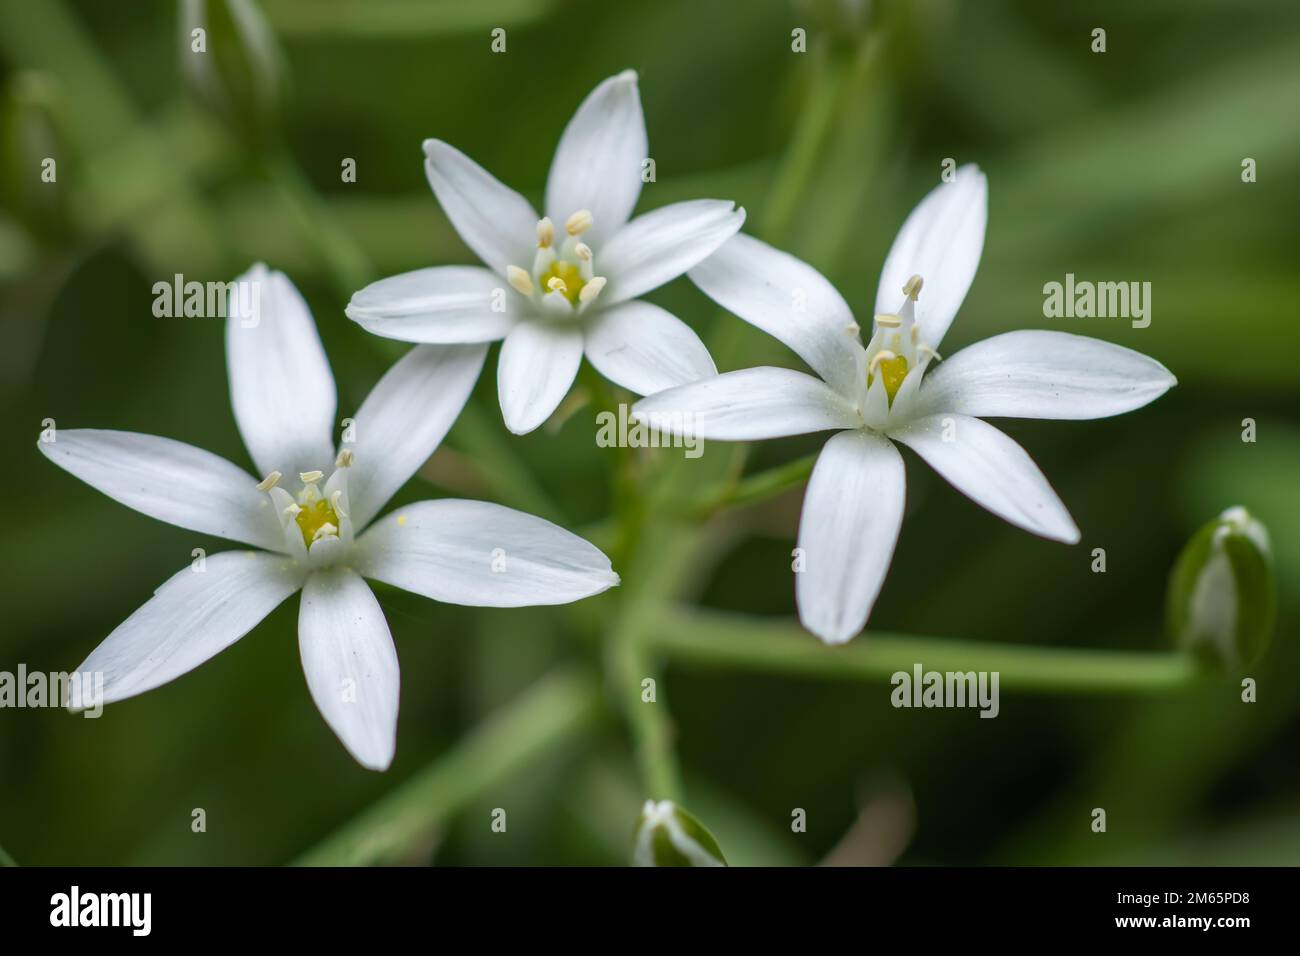 Ornithogalum flowers. beautiful bloom in the spring garden. Many white flowers of Ornithogalum. Ornithogalum umbellatum grass lily in bloom, small orn Stock Photo